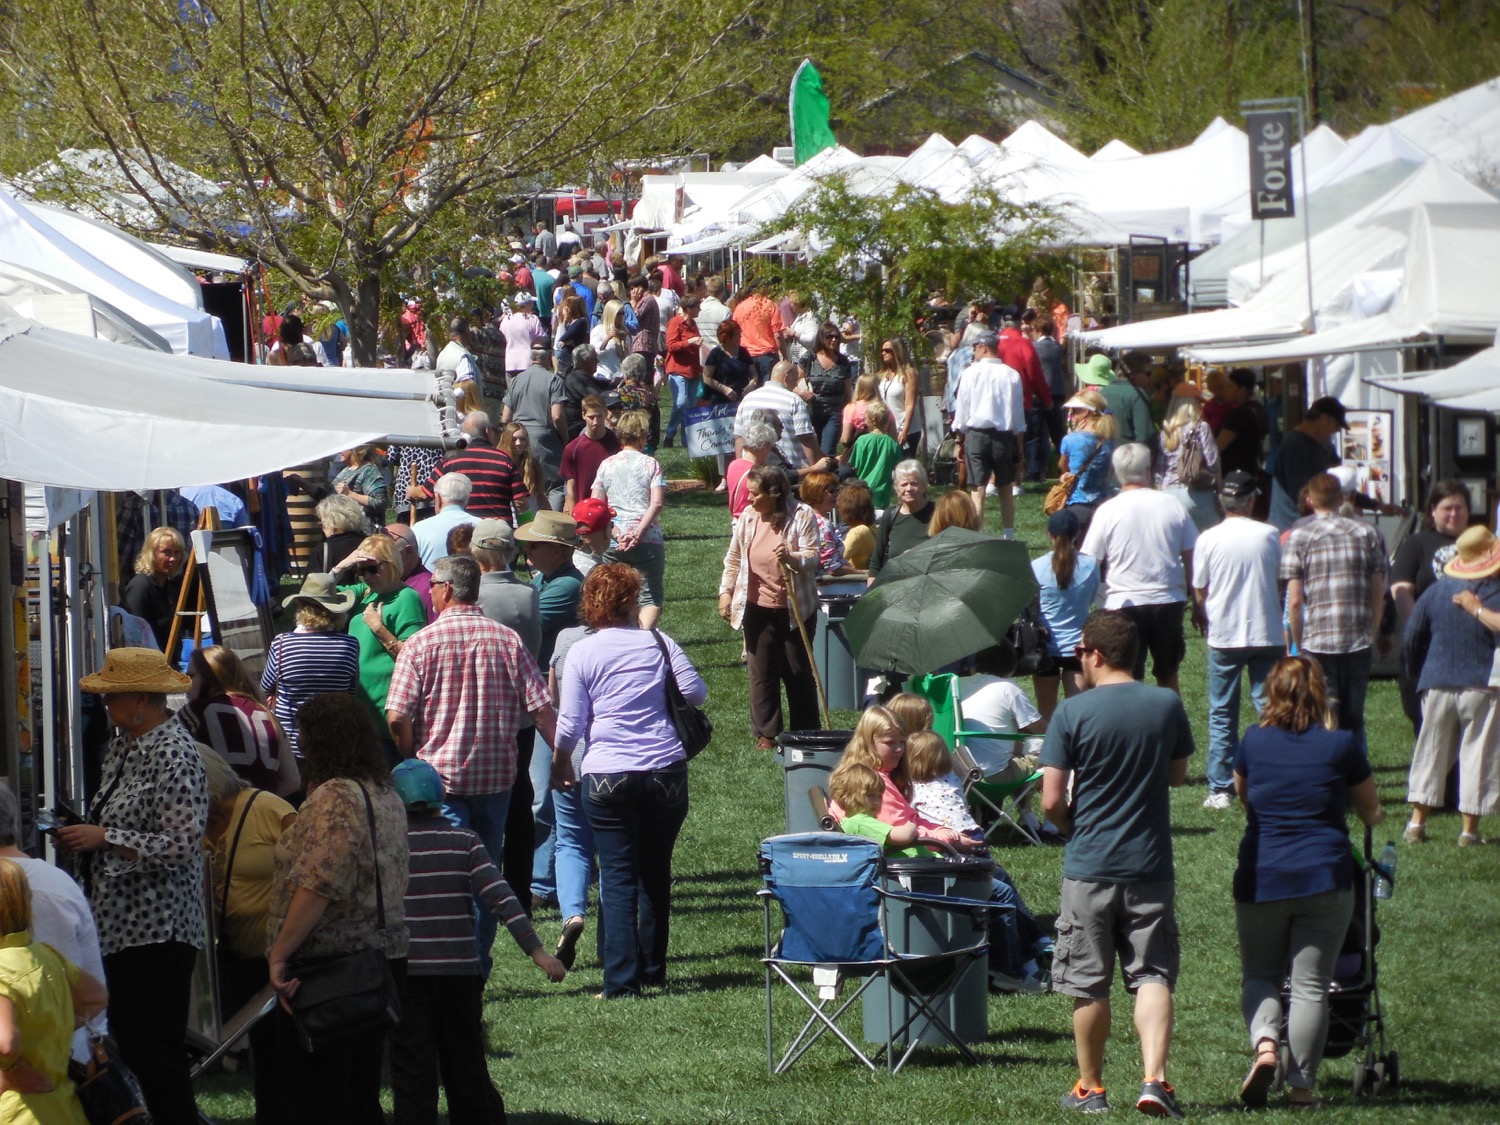 37th Annual St. Art Festival opens to balmy weather, big crowds